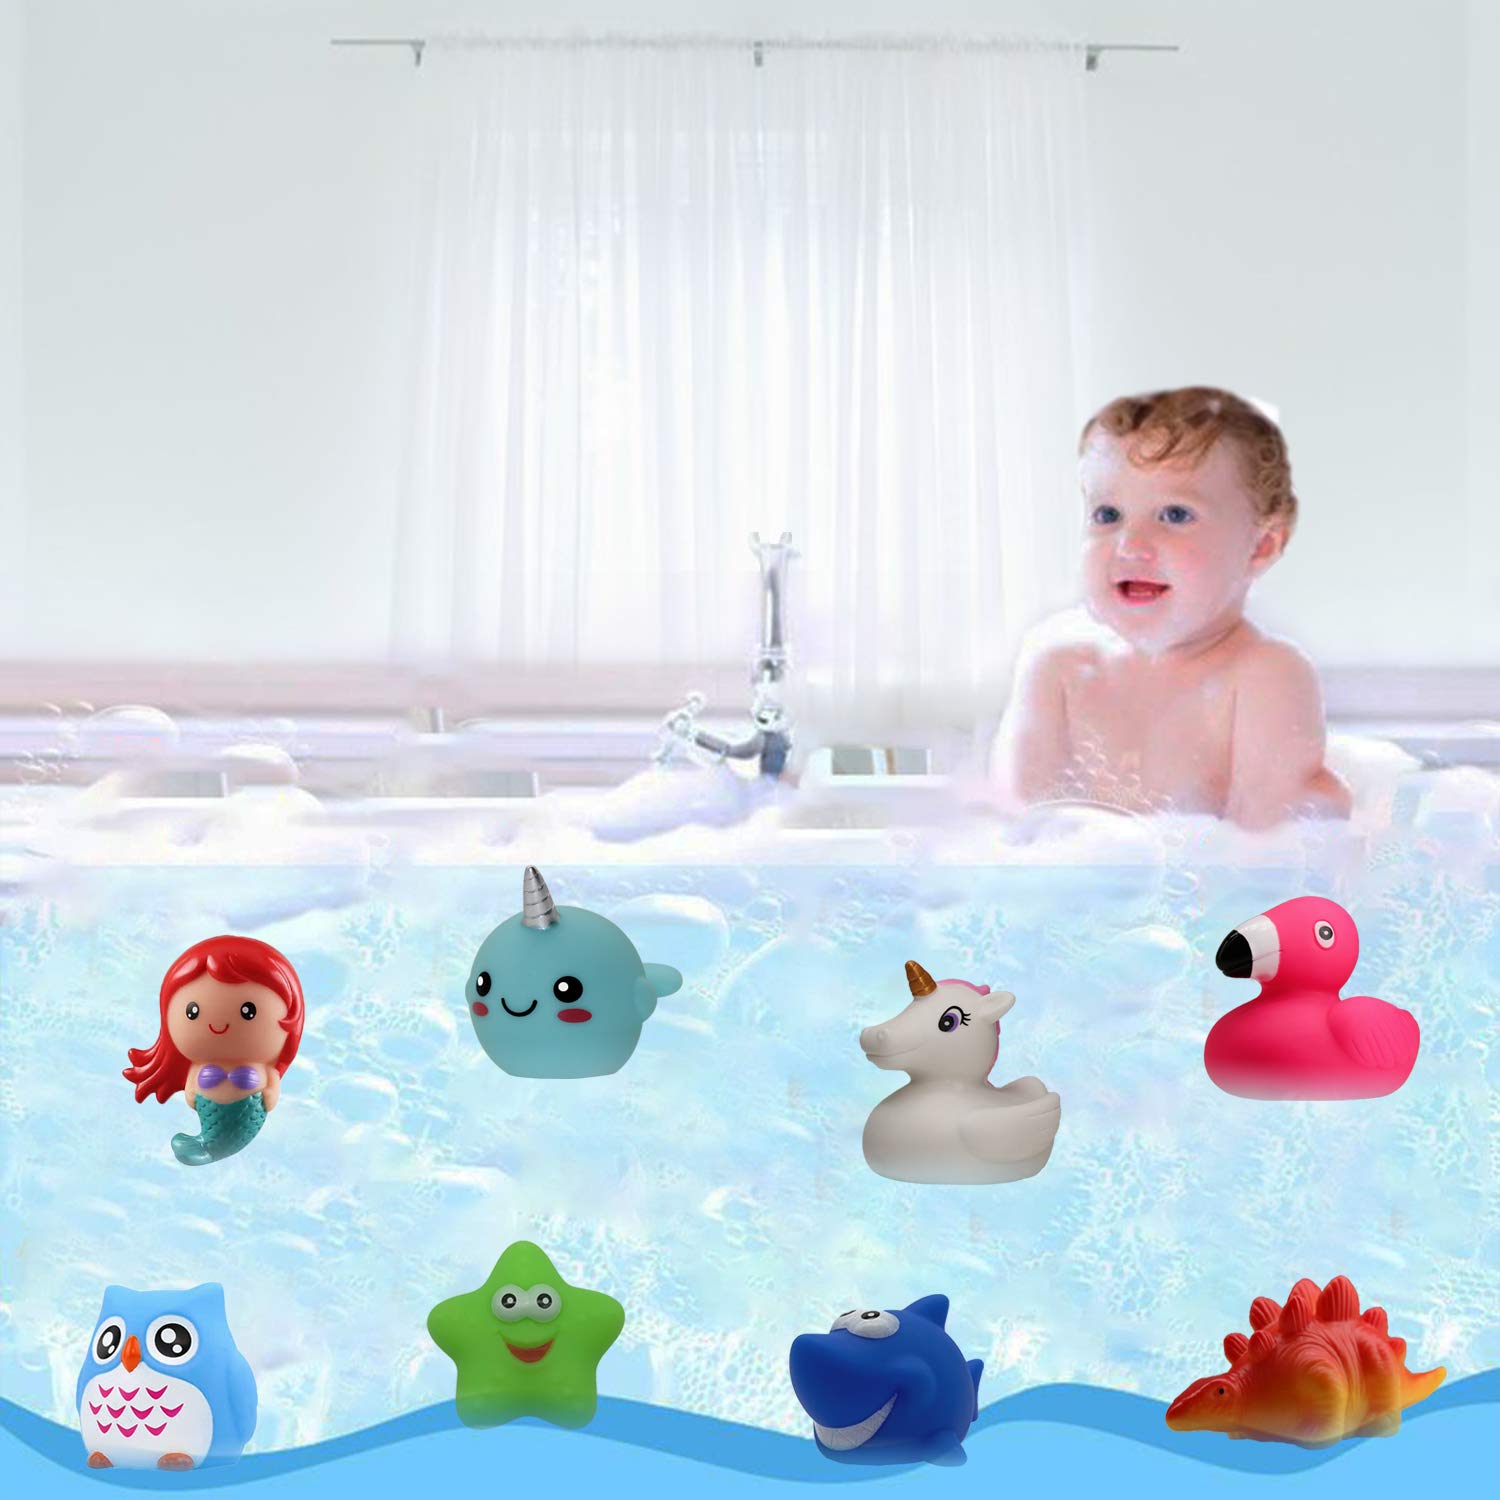 Jomyfant Bath Toys (8 Packs Rubber Animals Toys) Light Up Floating Rubber Toys Flashing Color Changing Light in Water Bathtub Shower Games Toys for Baby Kids Toddler Child